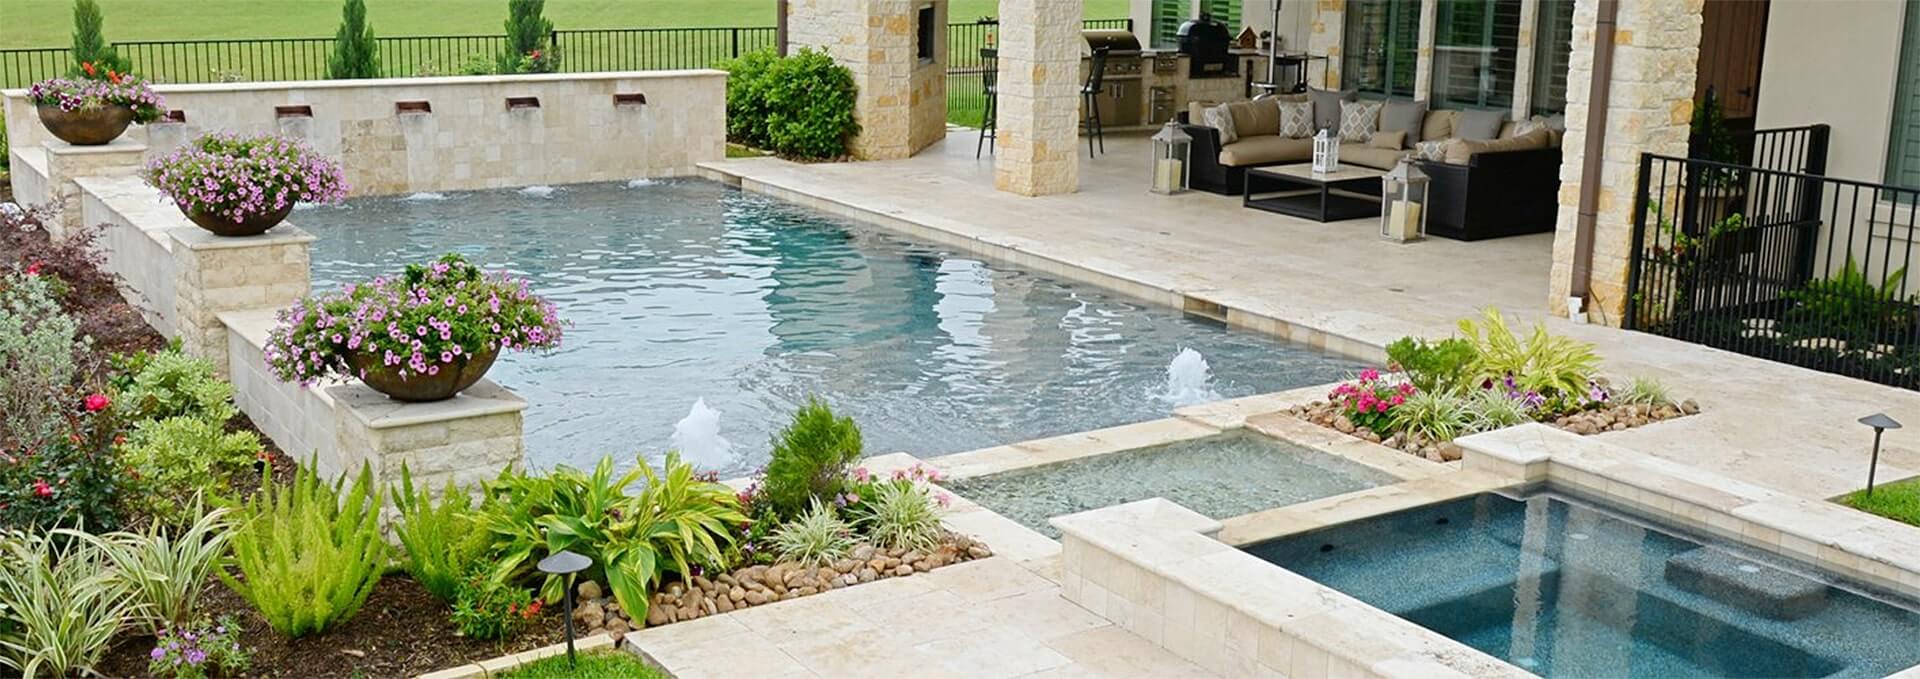 Rely on Quality Workmanship From Experienced Pool Builders Across the State of Florida